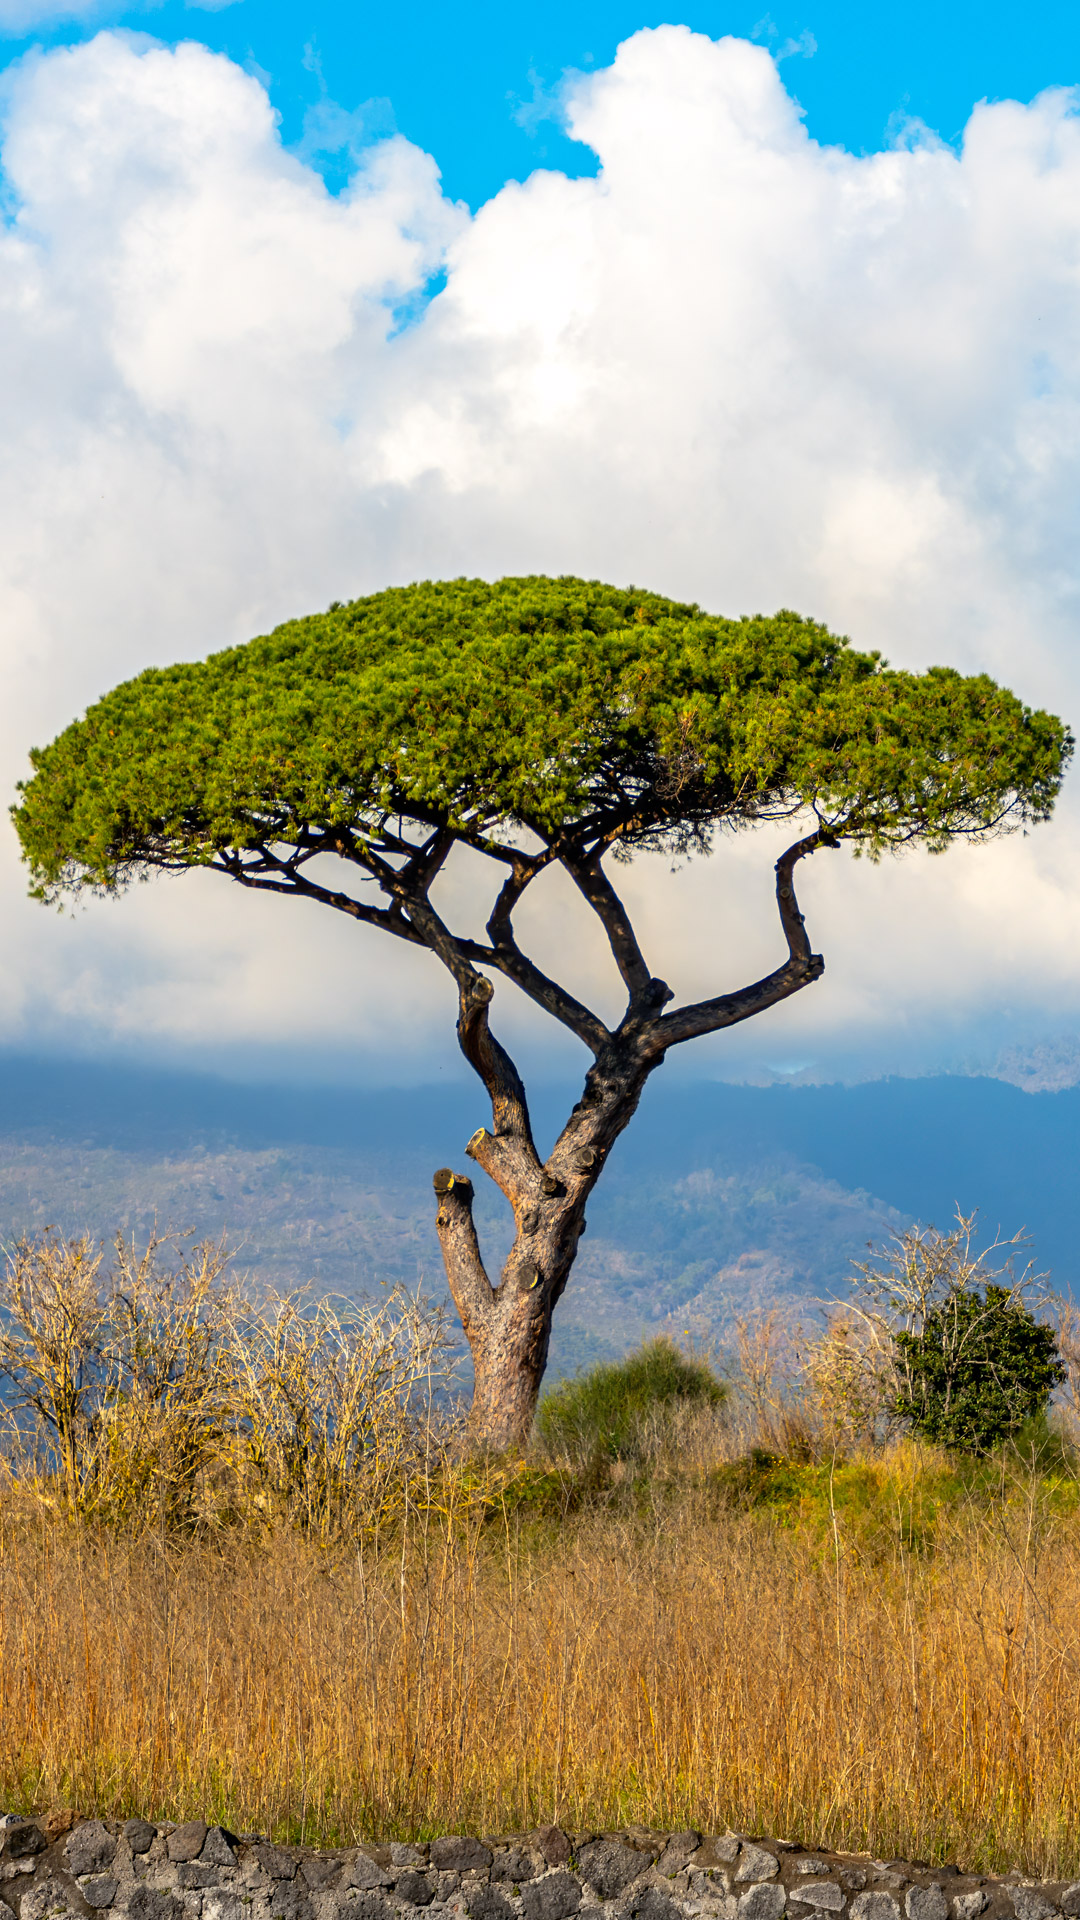 Venture into the Italian countryside with our new phone wallpaper, capturing the serene beauty of nature with a solitary tree standing tall against the backdrop of a clear sky.